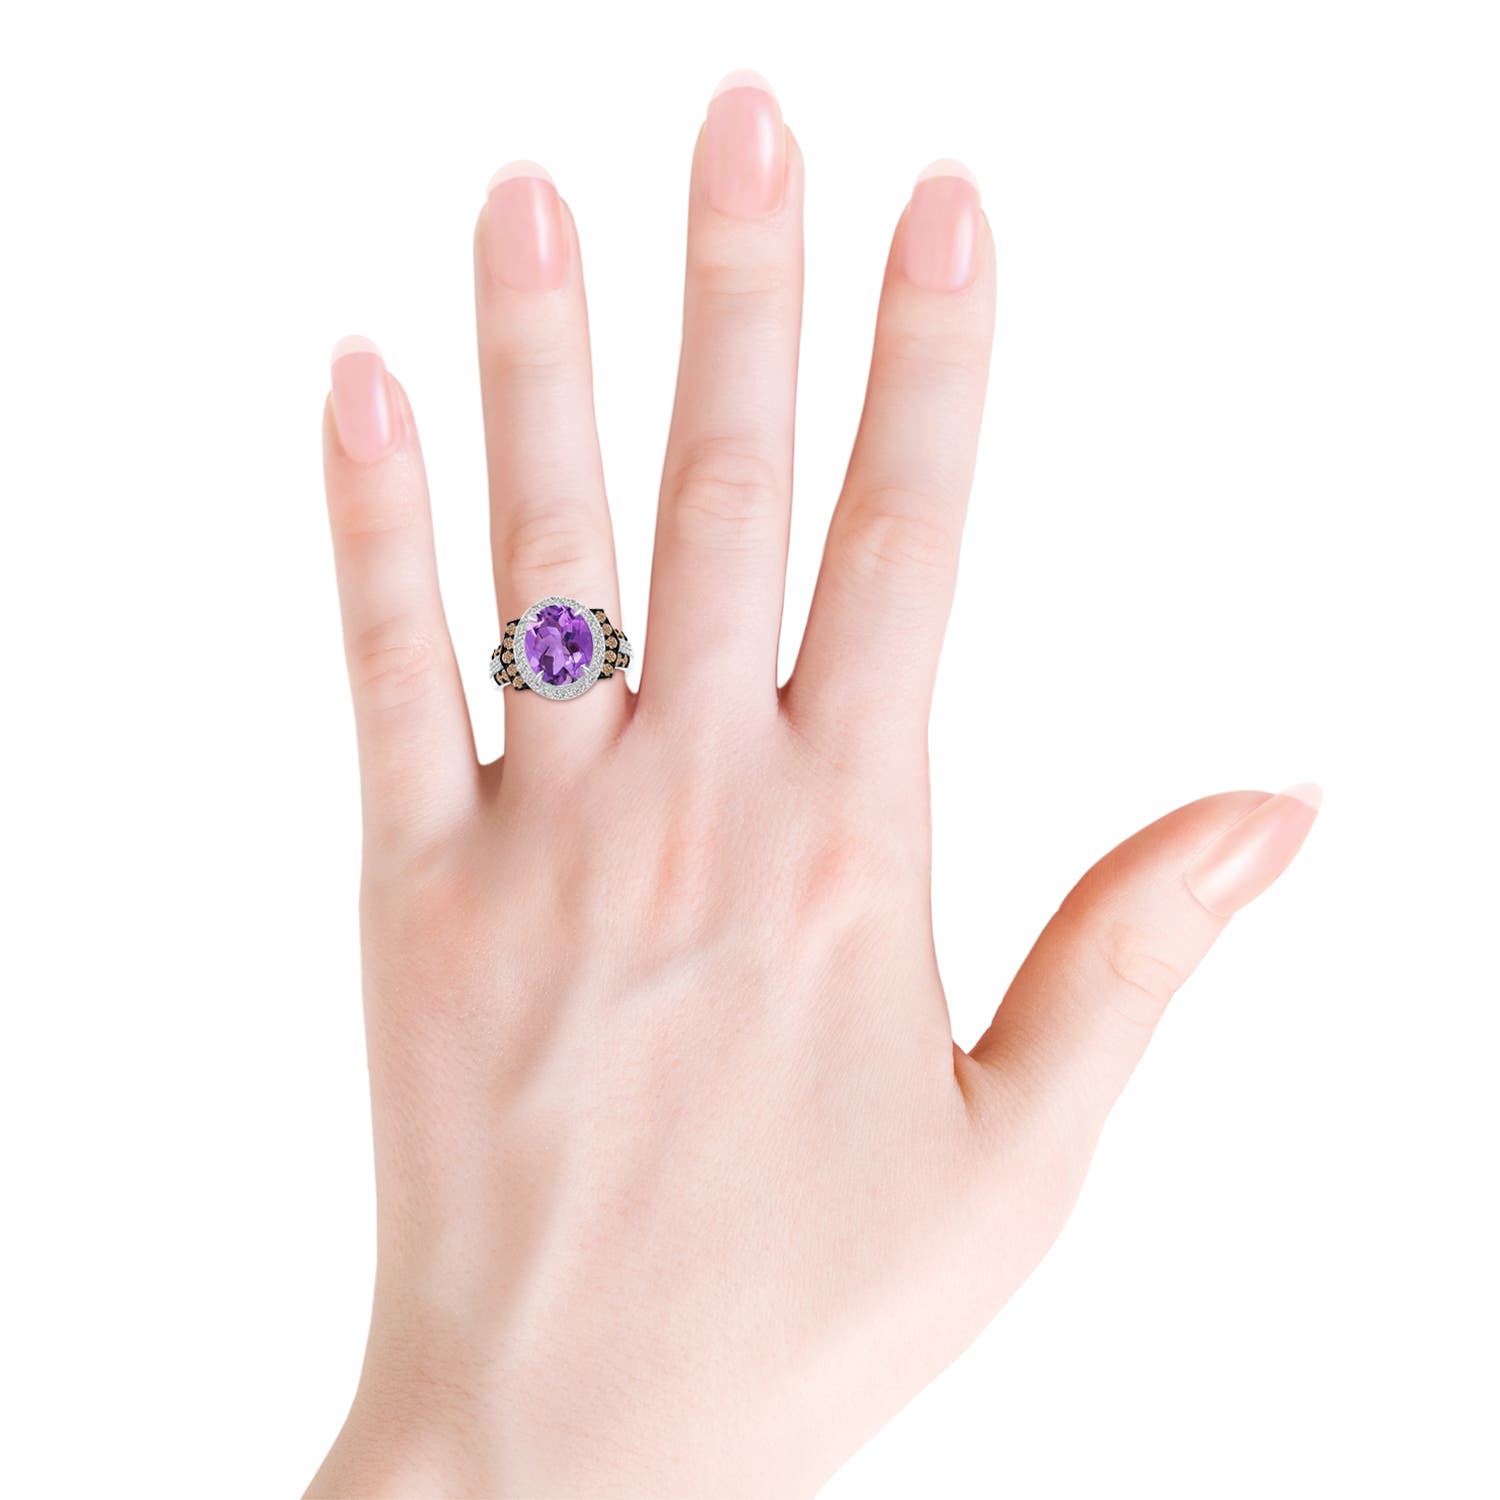 AA - Amethyst / 3.8 CT / 14 KT White Gold